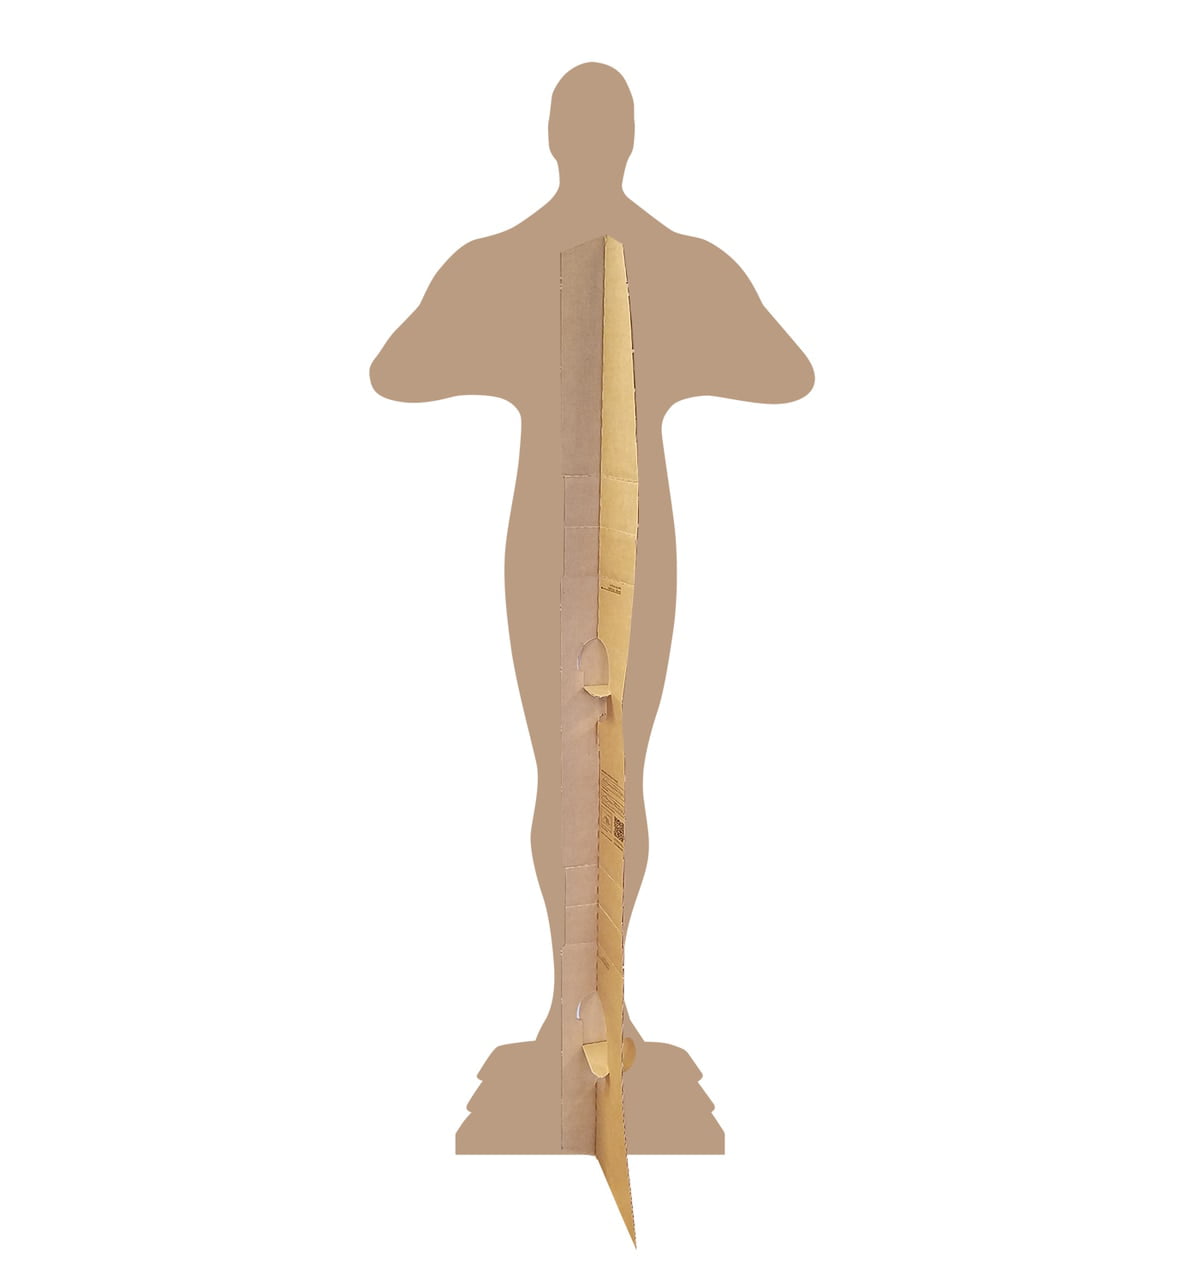 Picture of Advanced Graphics 2480 87 x 35 in. Trophy Award Standup Cardboard Standup